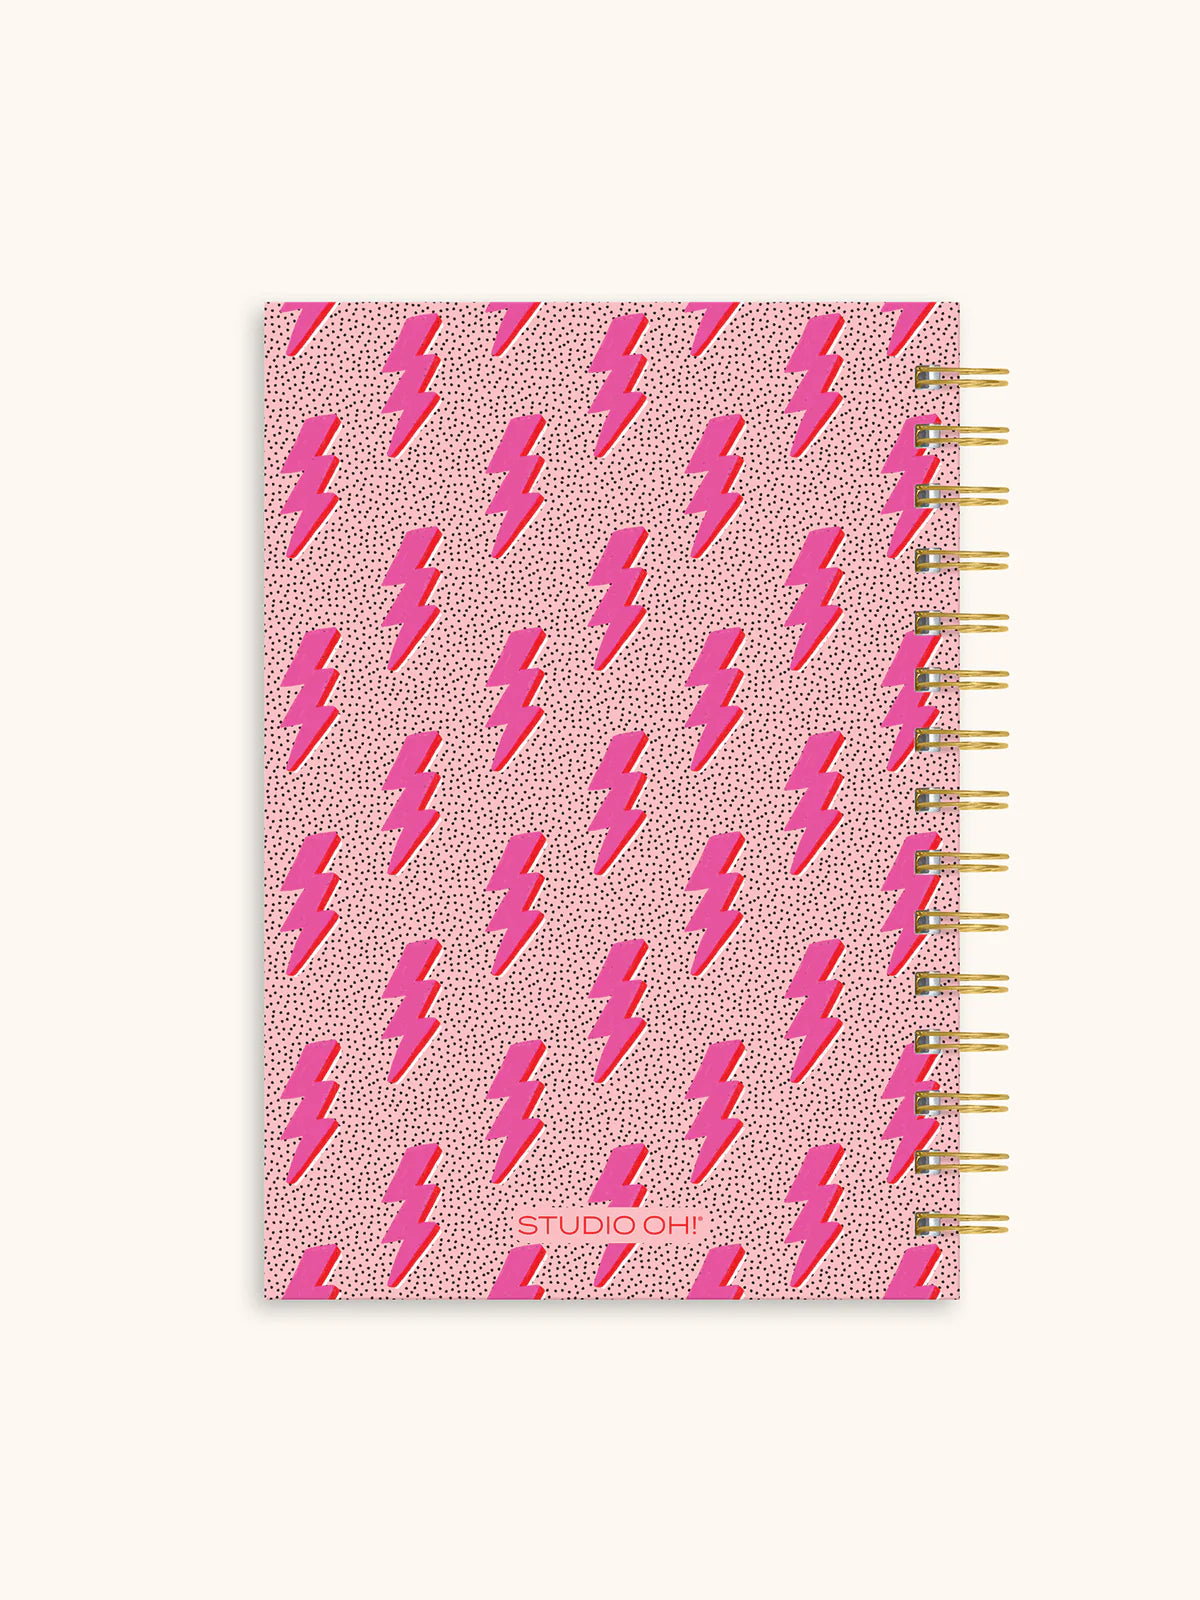 Oliver Notebook with Pen Pocket: Charged Up